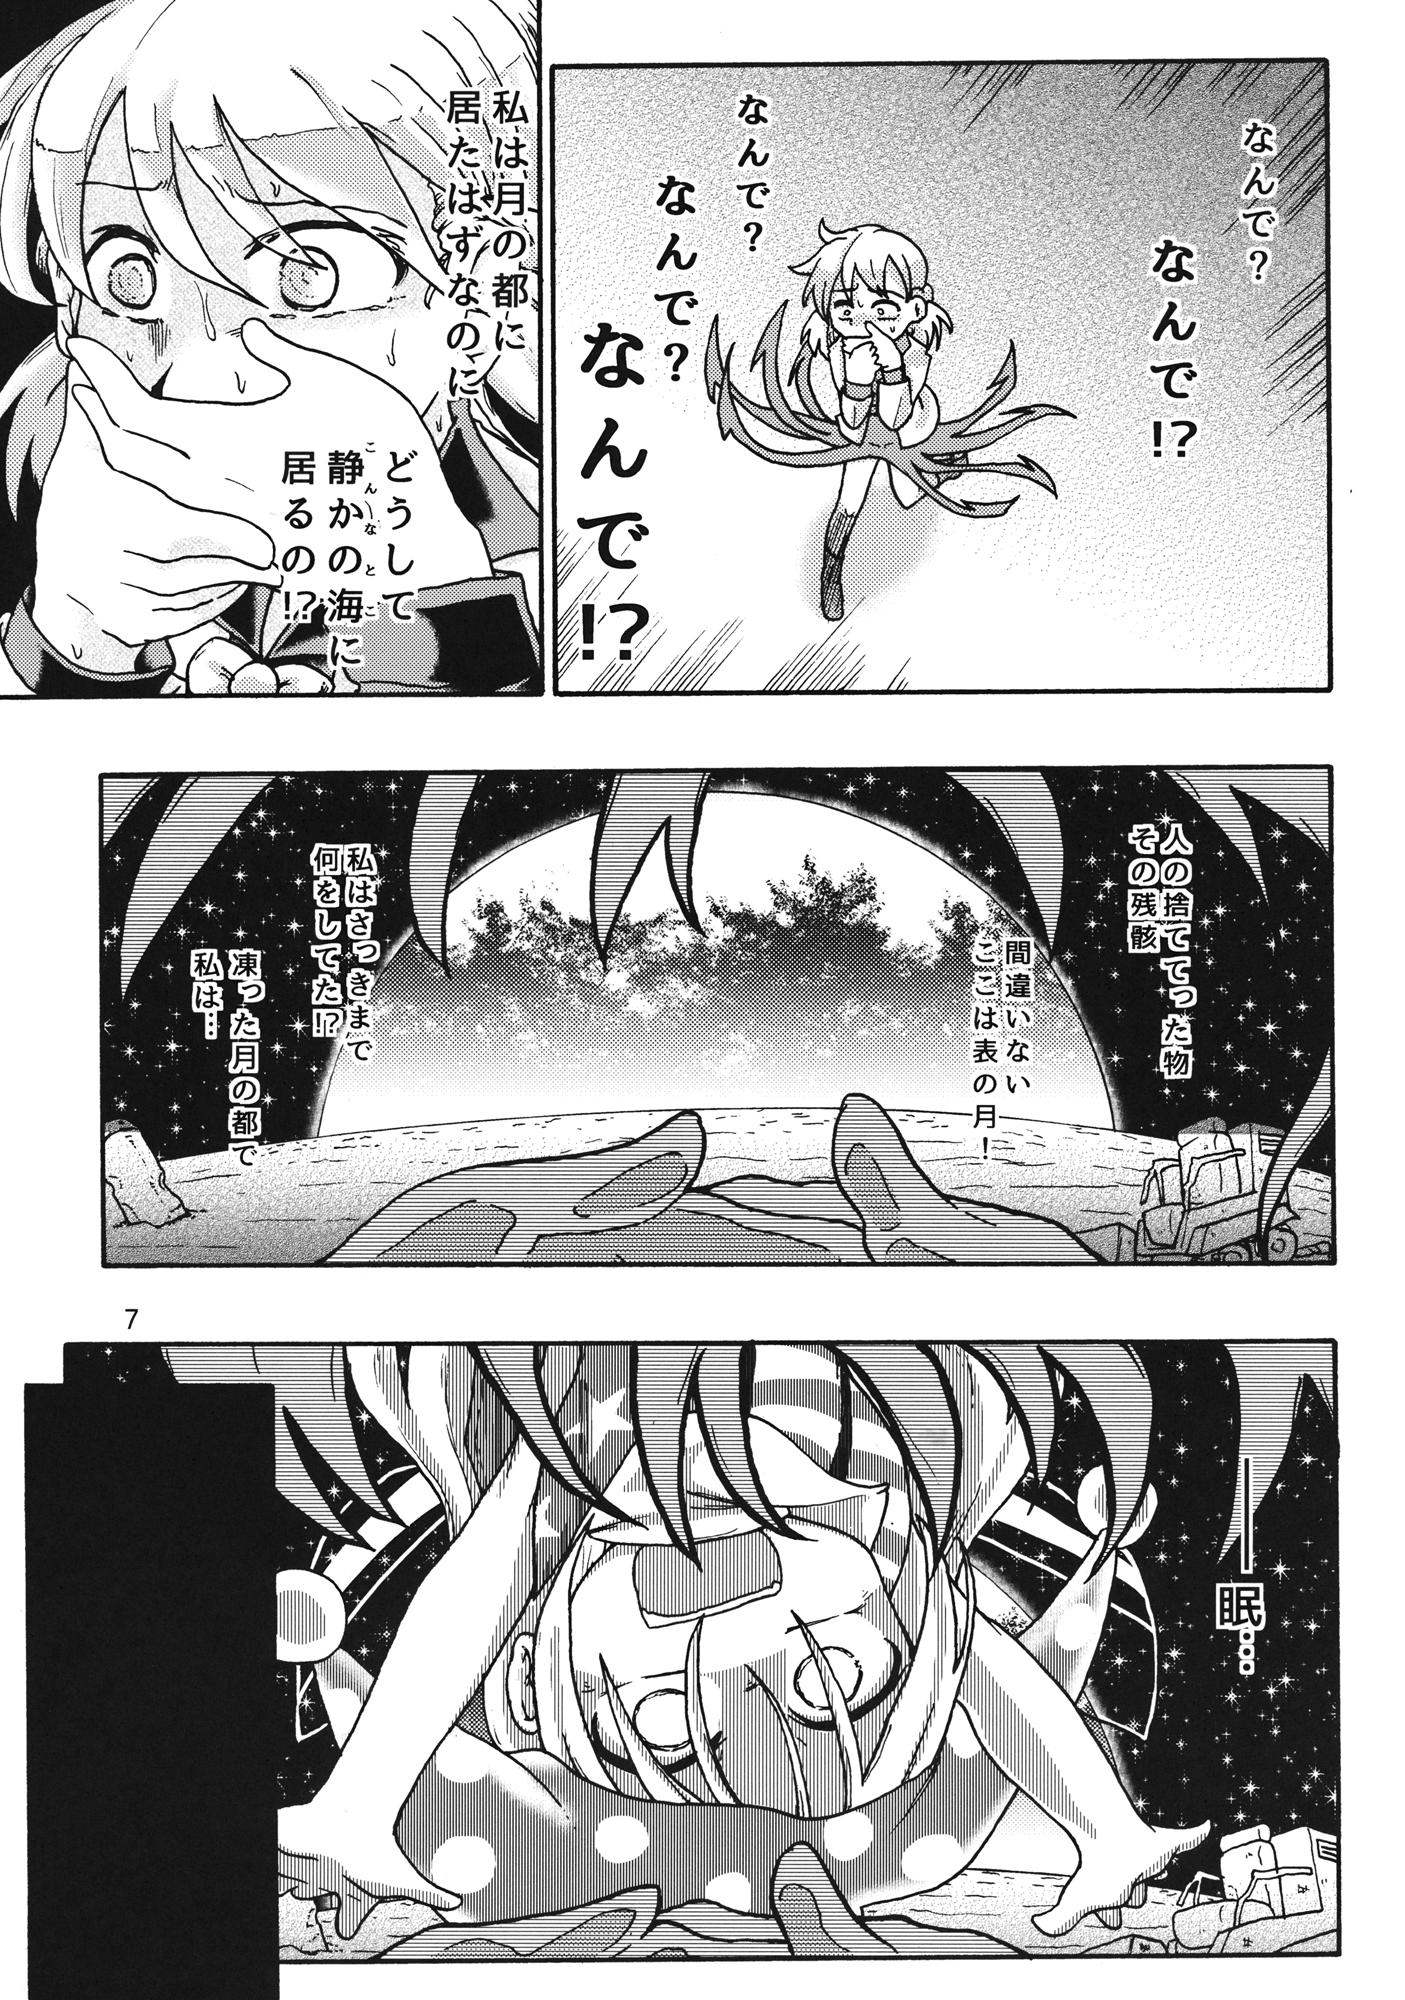 Reversecowgirl Creeping! - Touhou project Webcam - Page 6